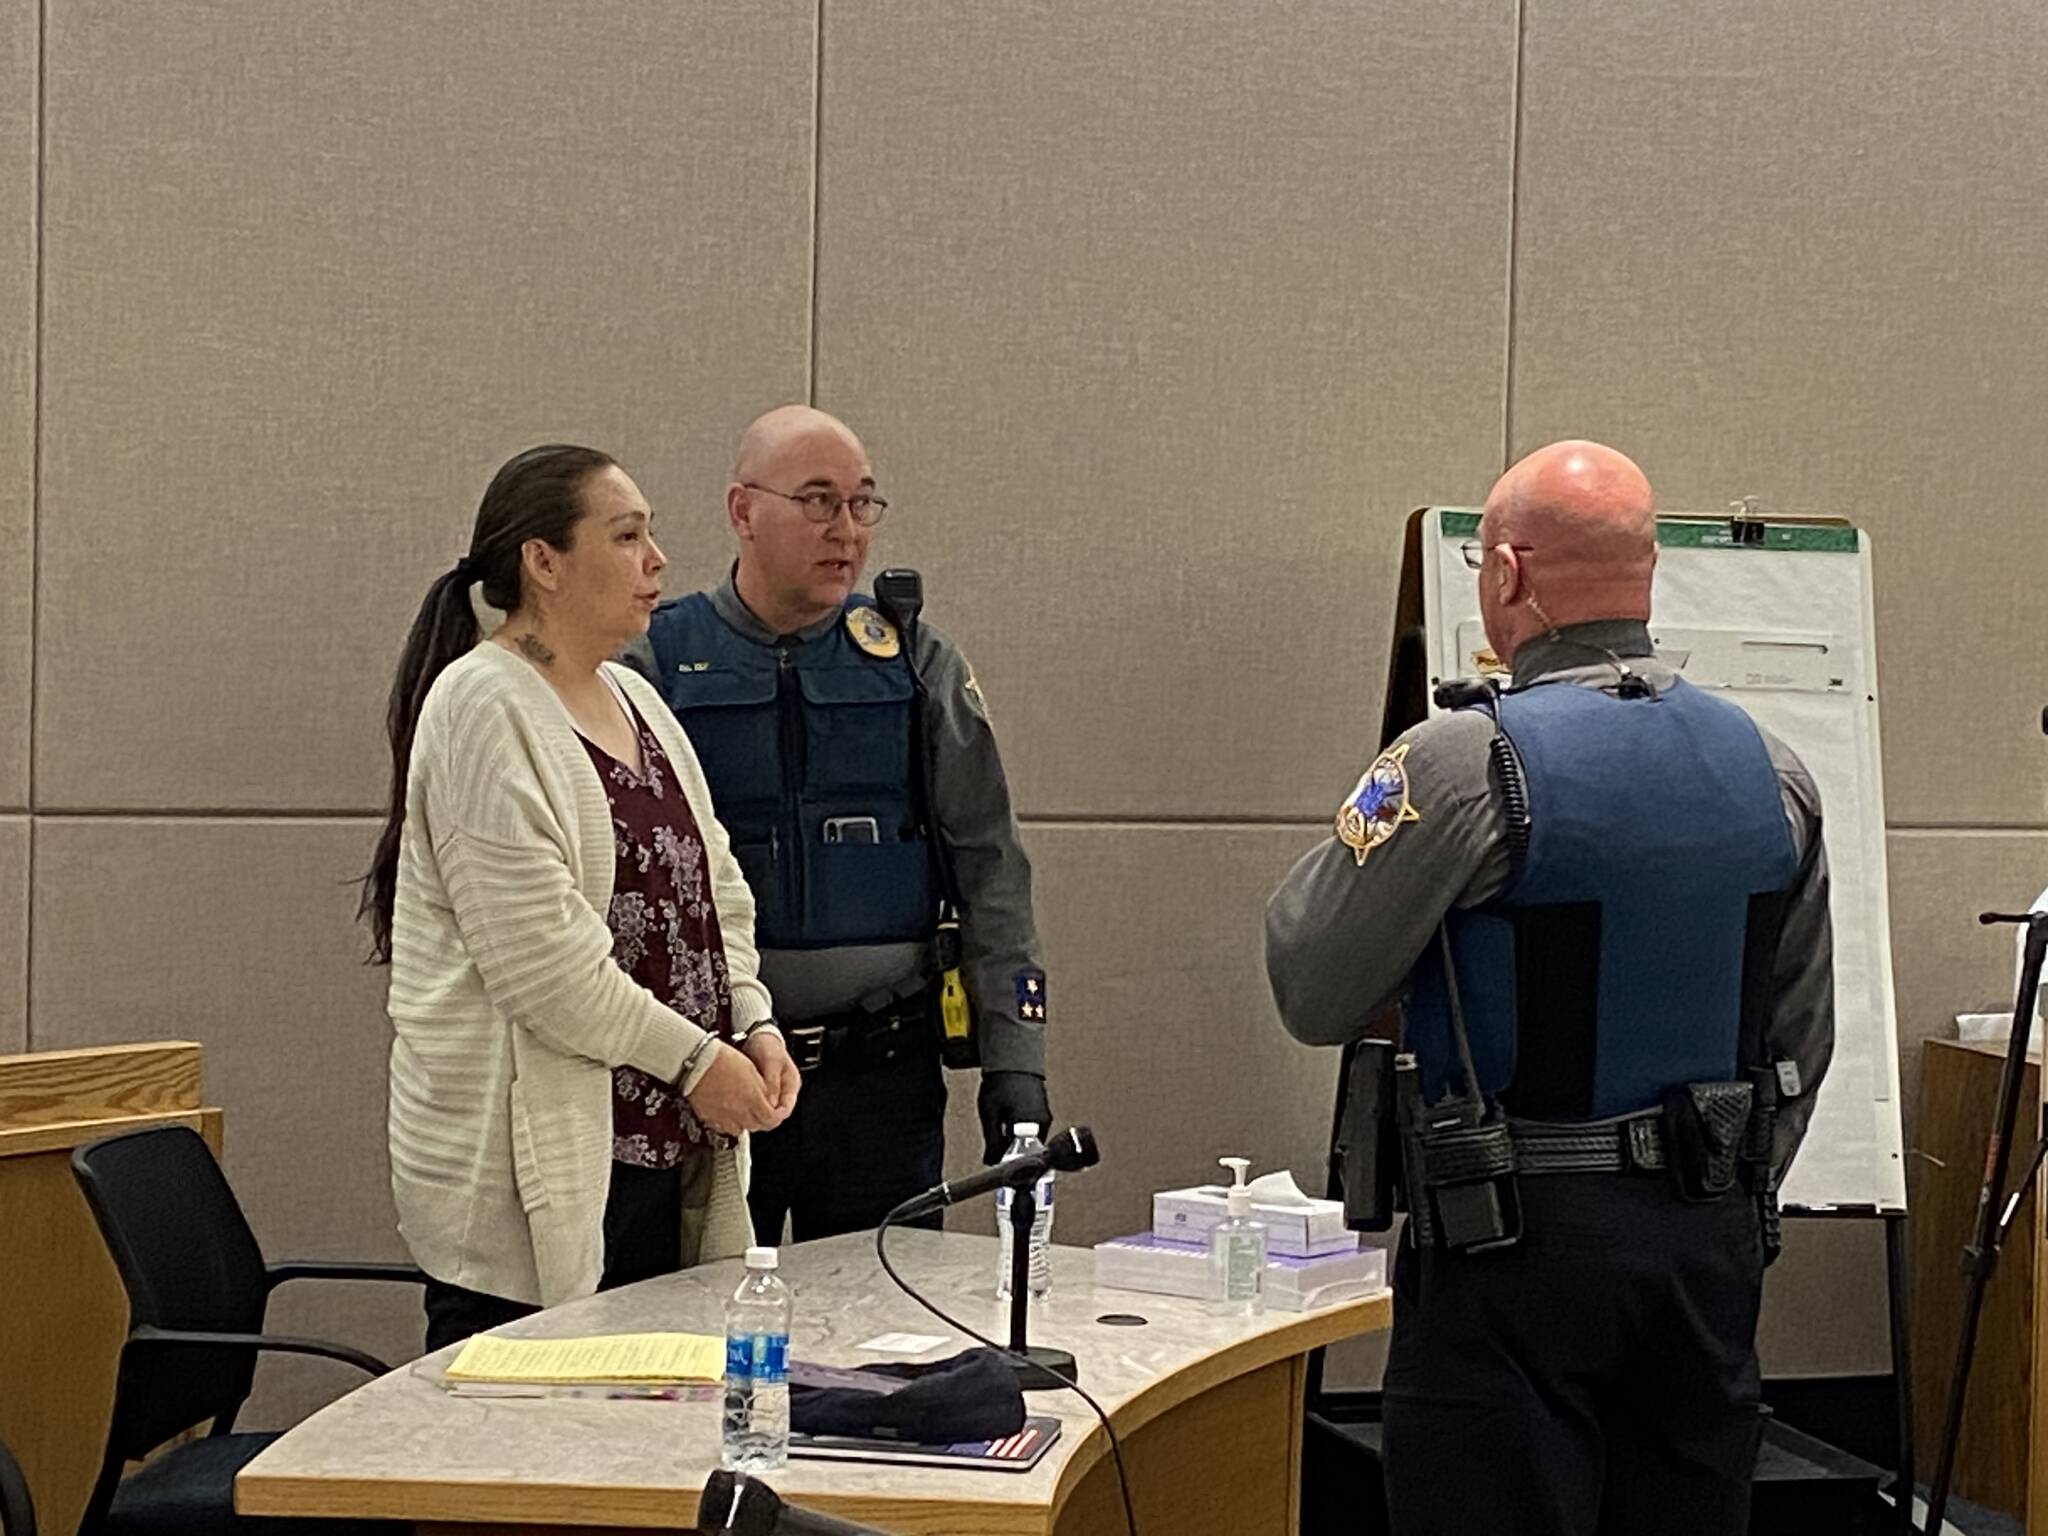 Sonya Taton, left, is handcuffed following her conviction on five counts, including second-degree murder, Friday in Superior Court in Juneau. (Meredith Jordan / Juneau Empire)